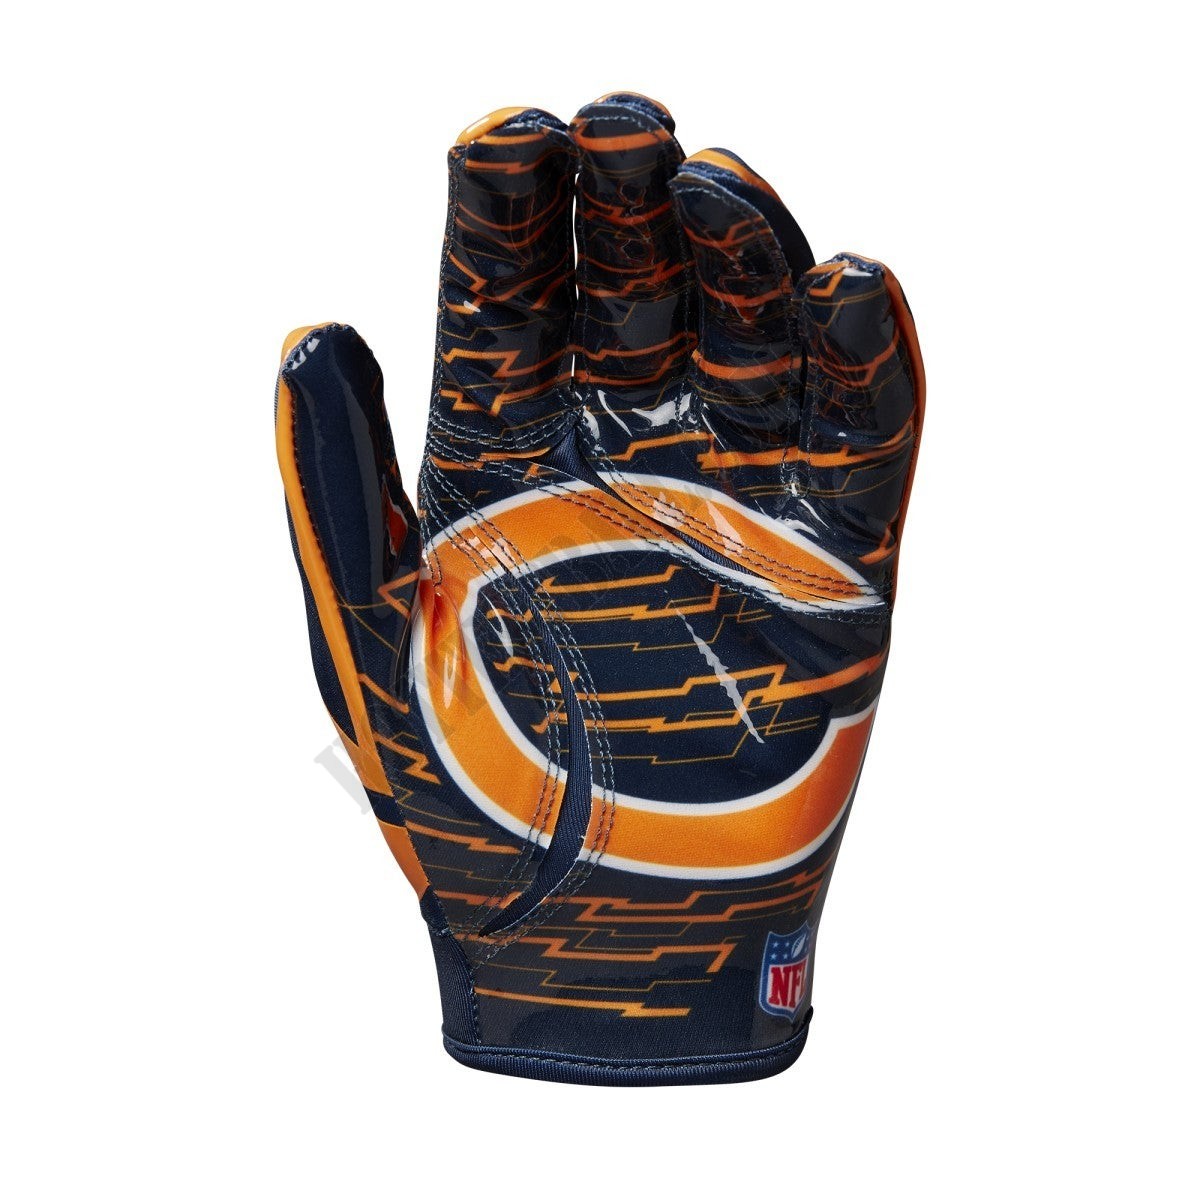 NFL Stretch Fit Receivers Gloves - Chicago Bears - Wilson Discount Store - -2